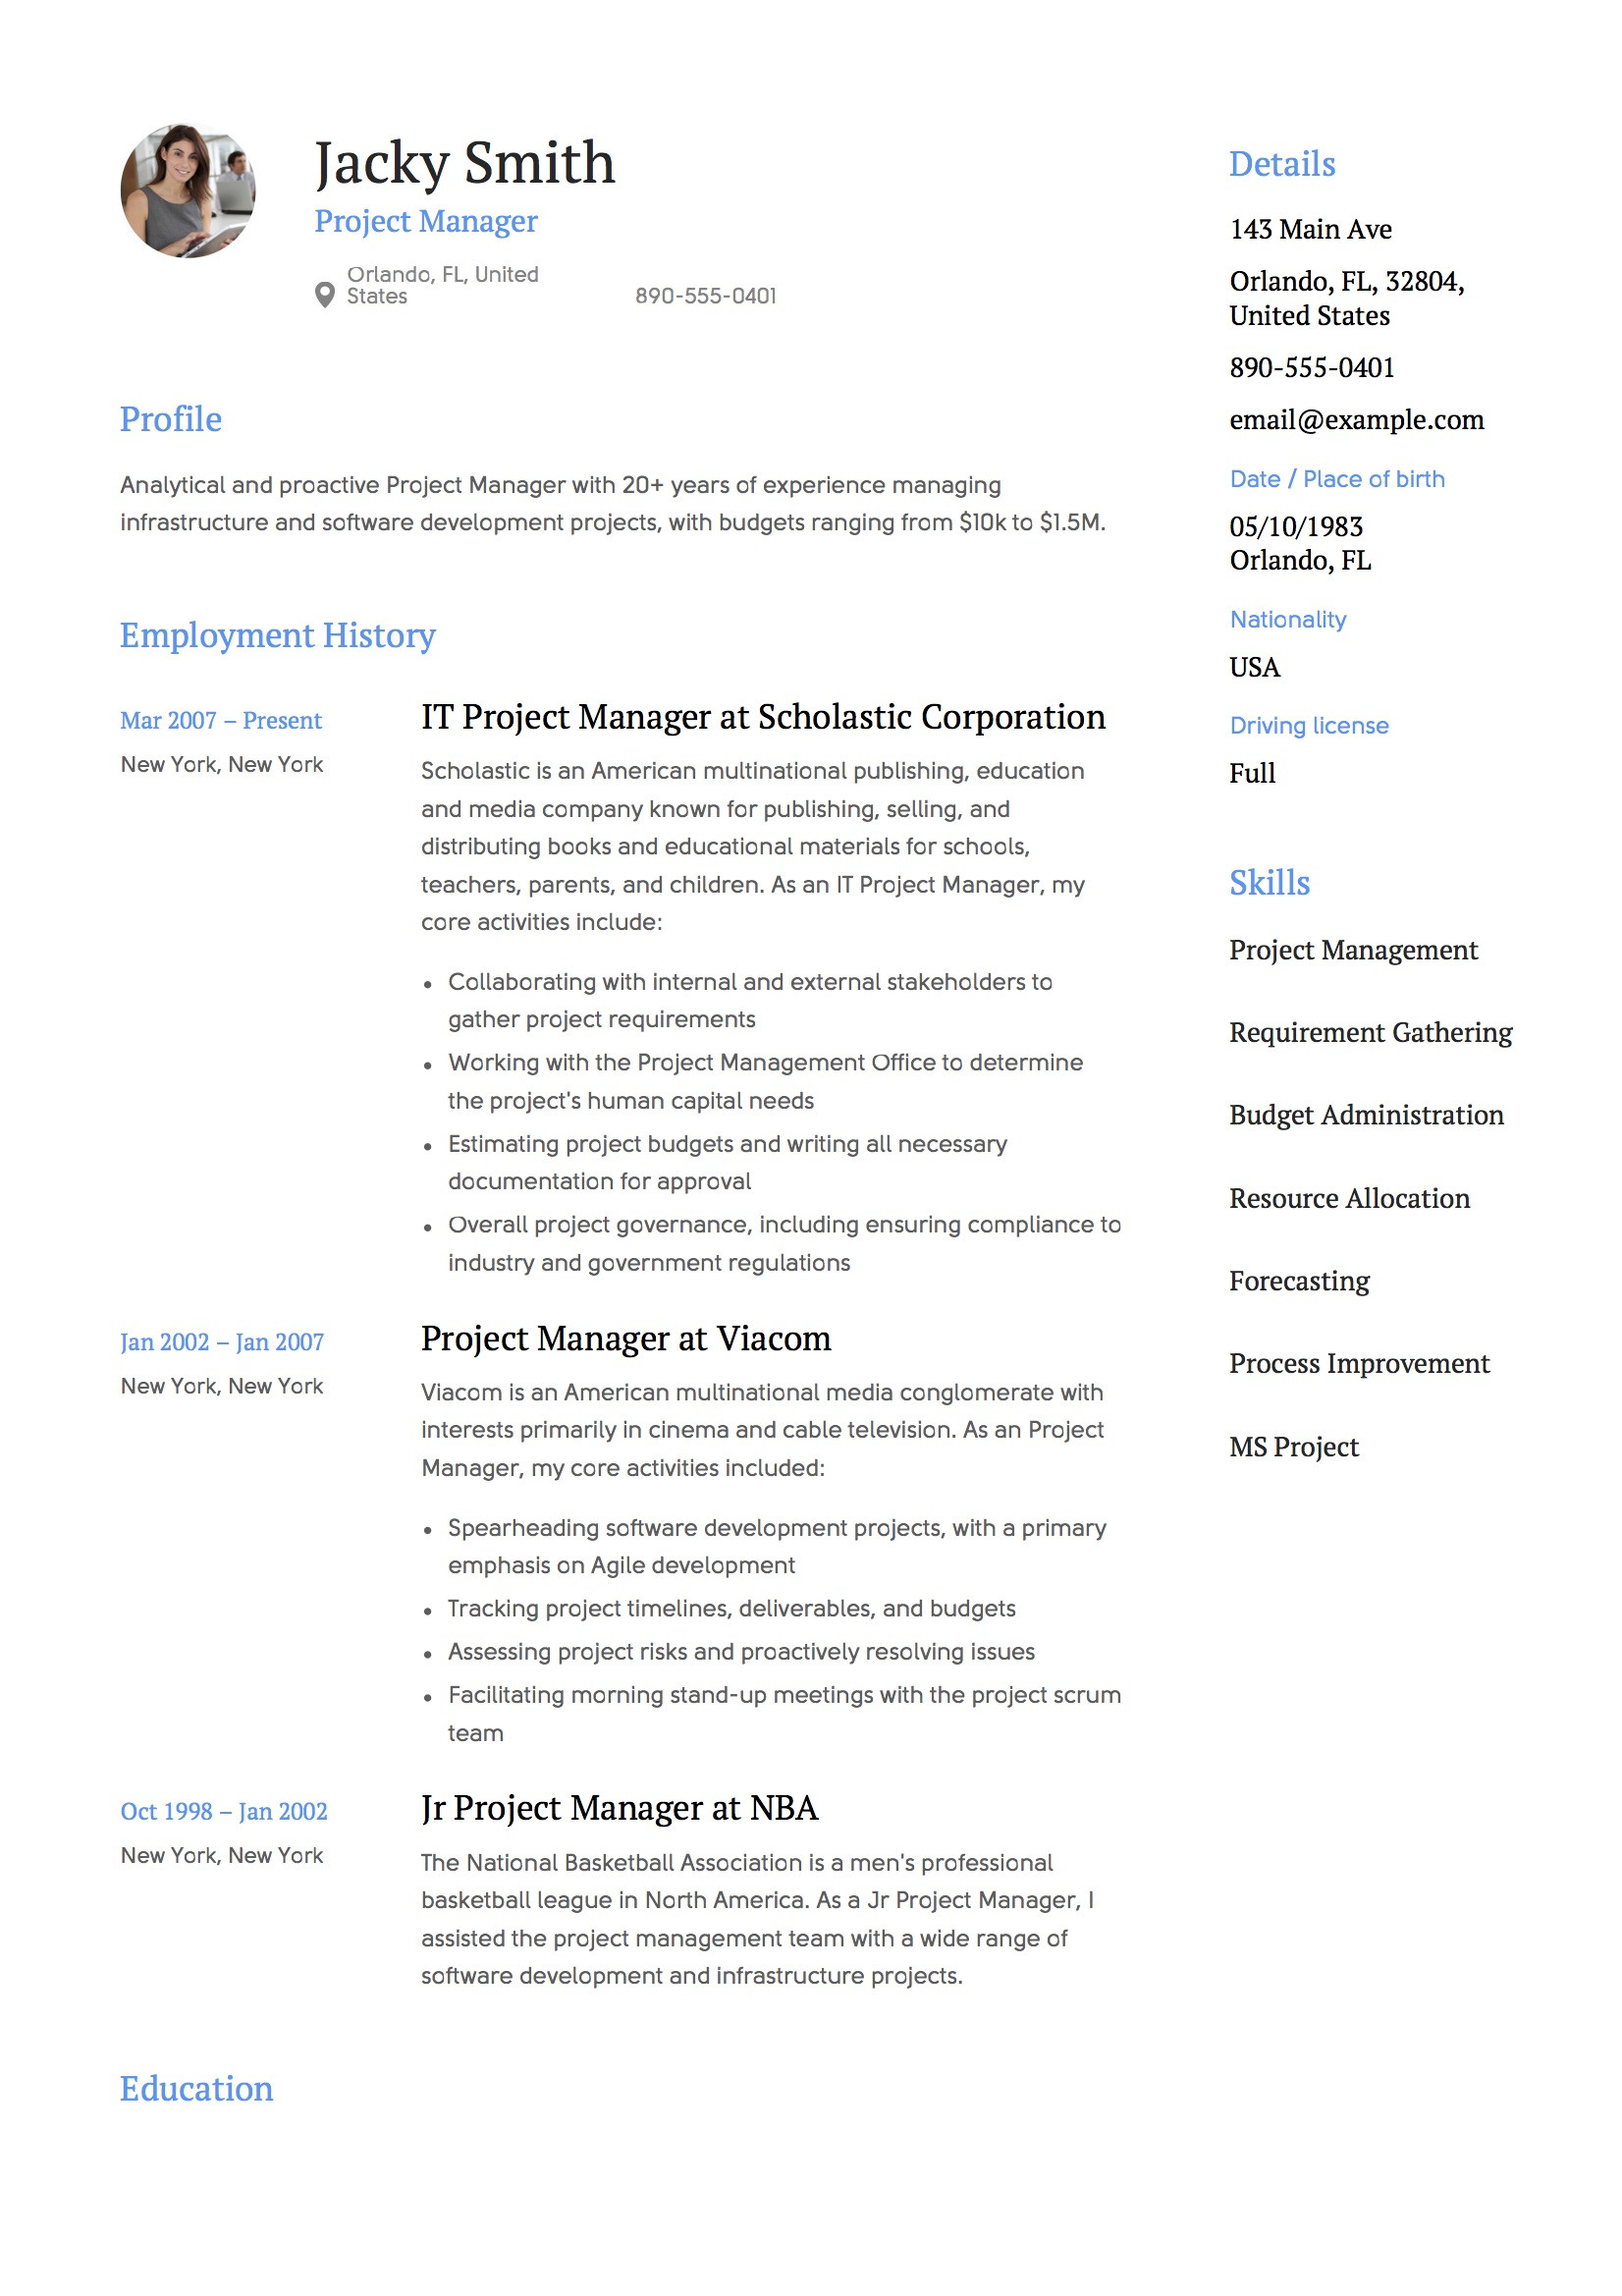 Project Manager Resume Template Free Download 20 Project Manager Resume Examples & Full Guide Pdf & Word 2021